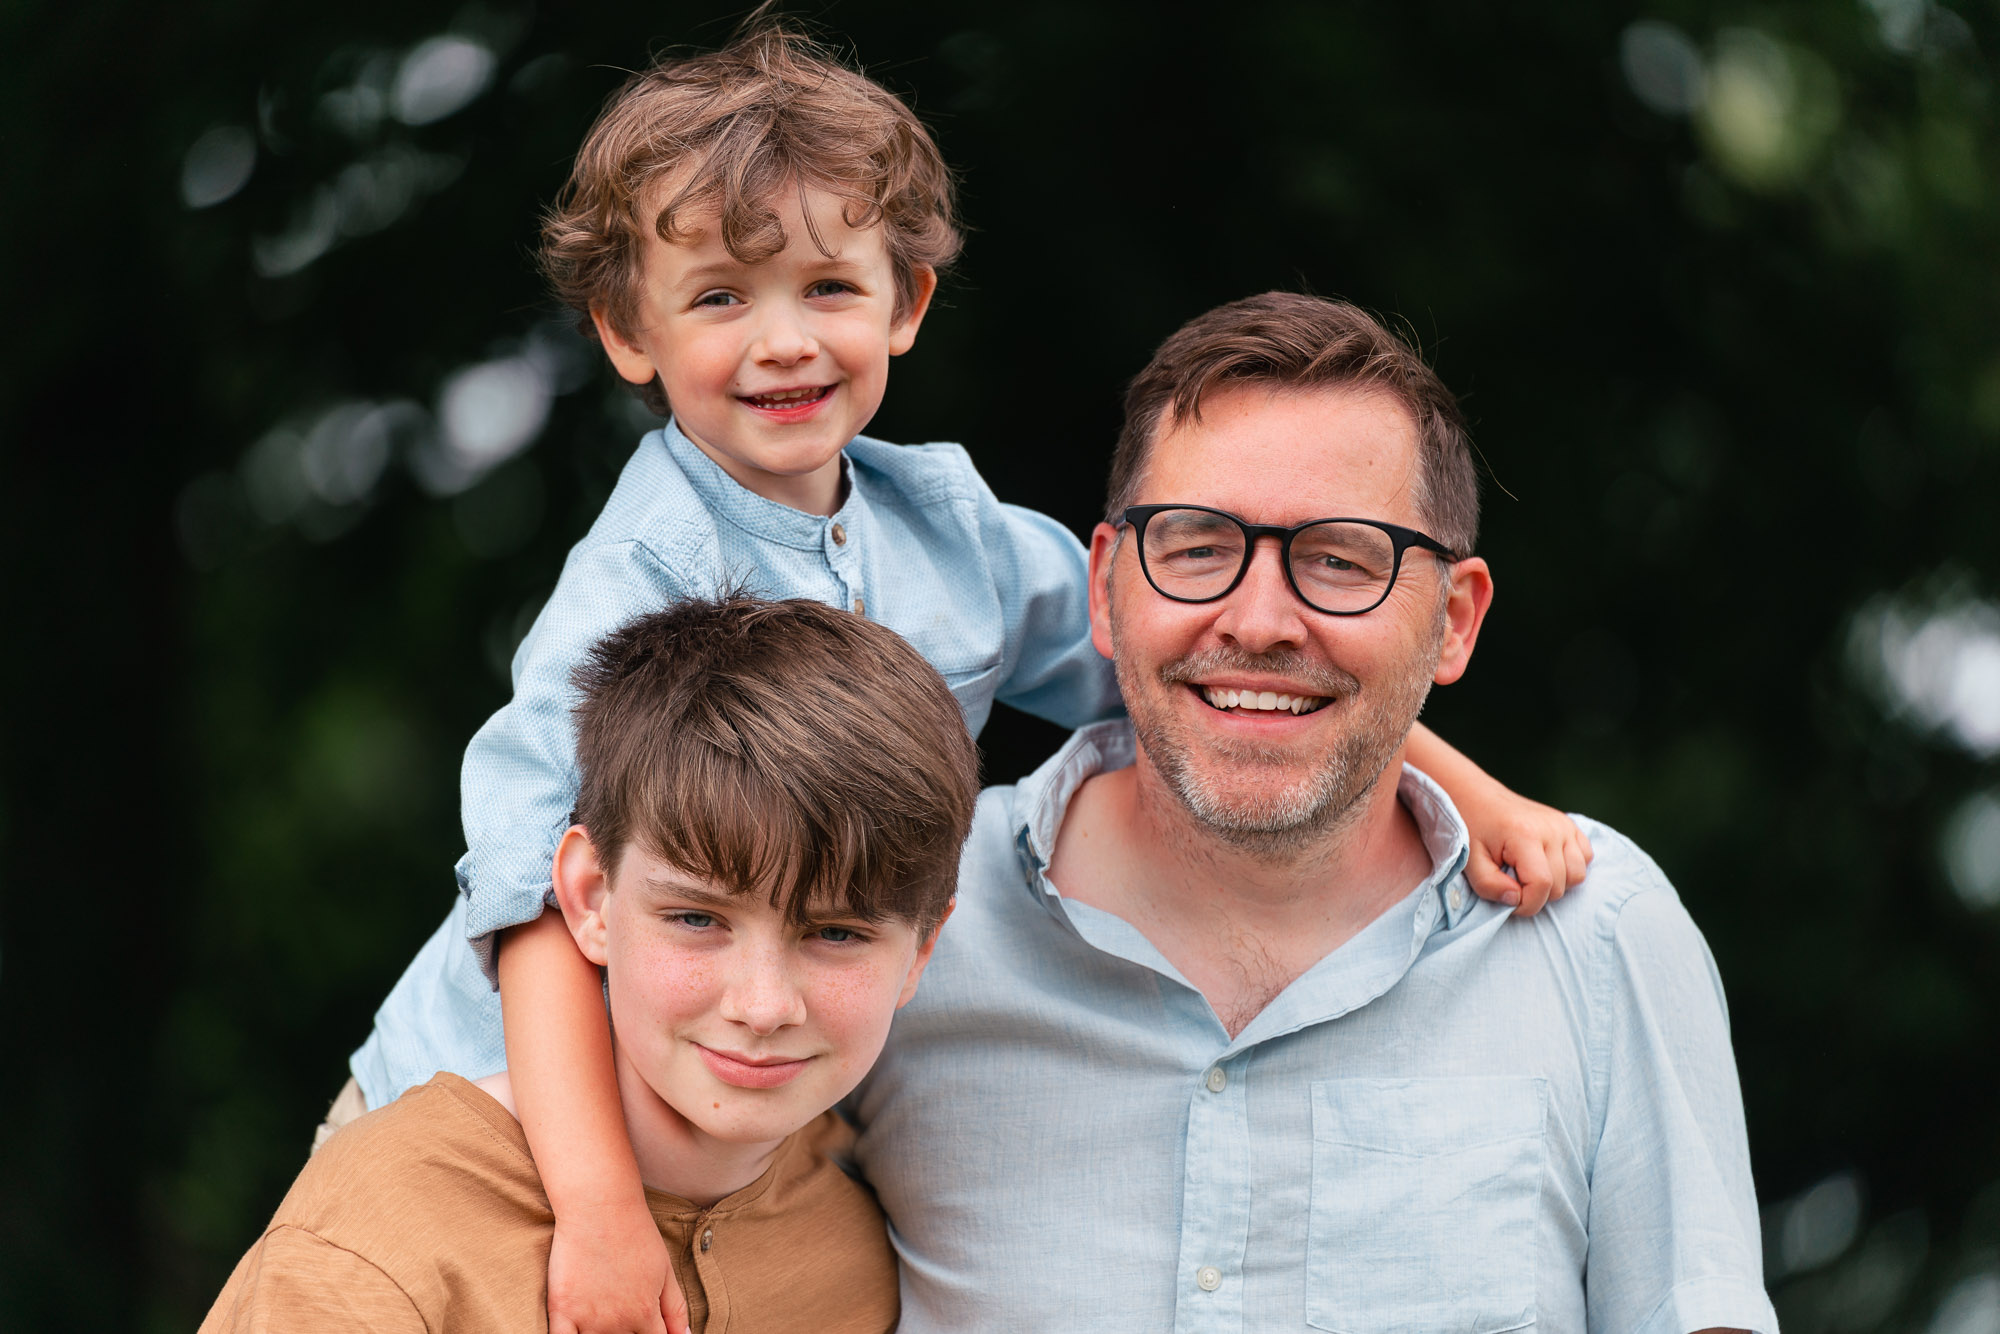 professional family portrait od dad and two sons. All wearing white shirts and denim jeans in front of a grey backdrop. Photograph by Beautiful Bairns photography Edinburgh family photographer